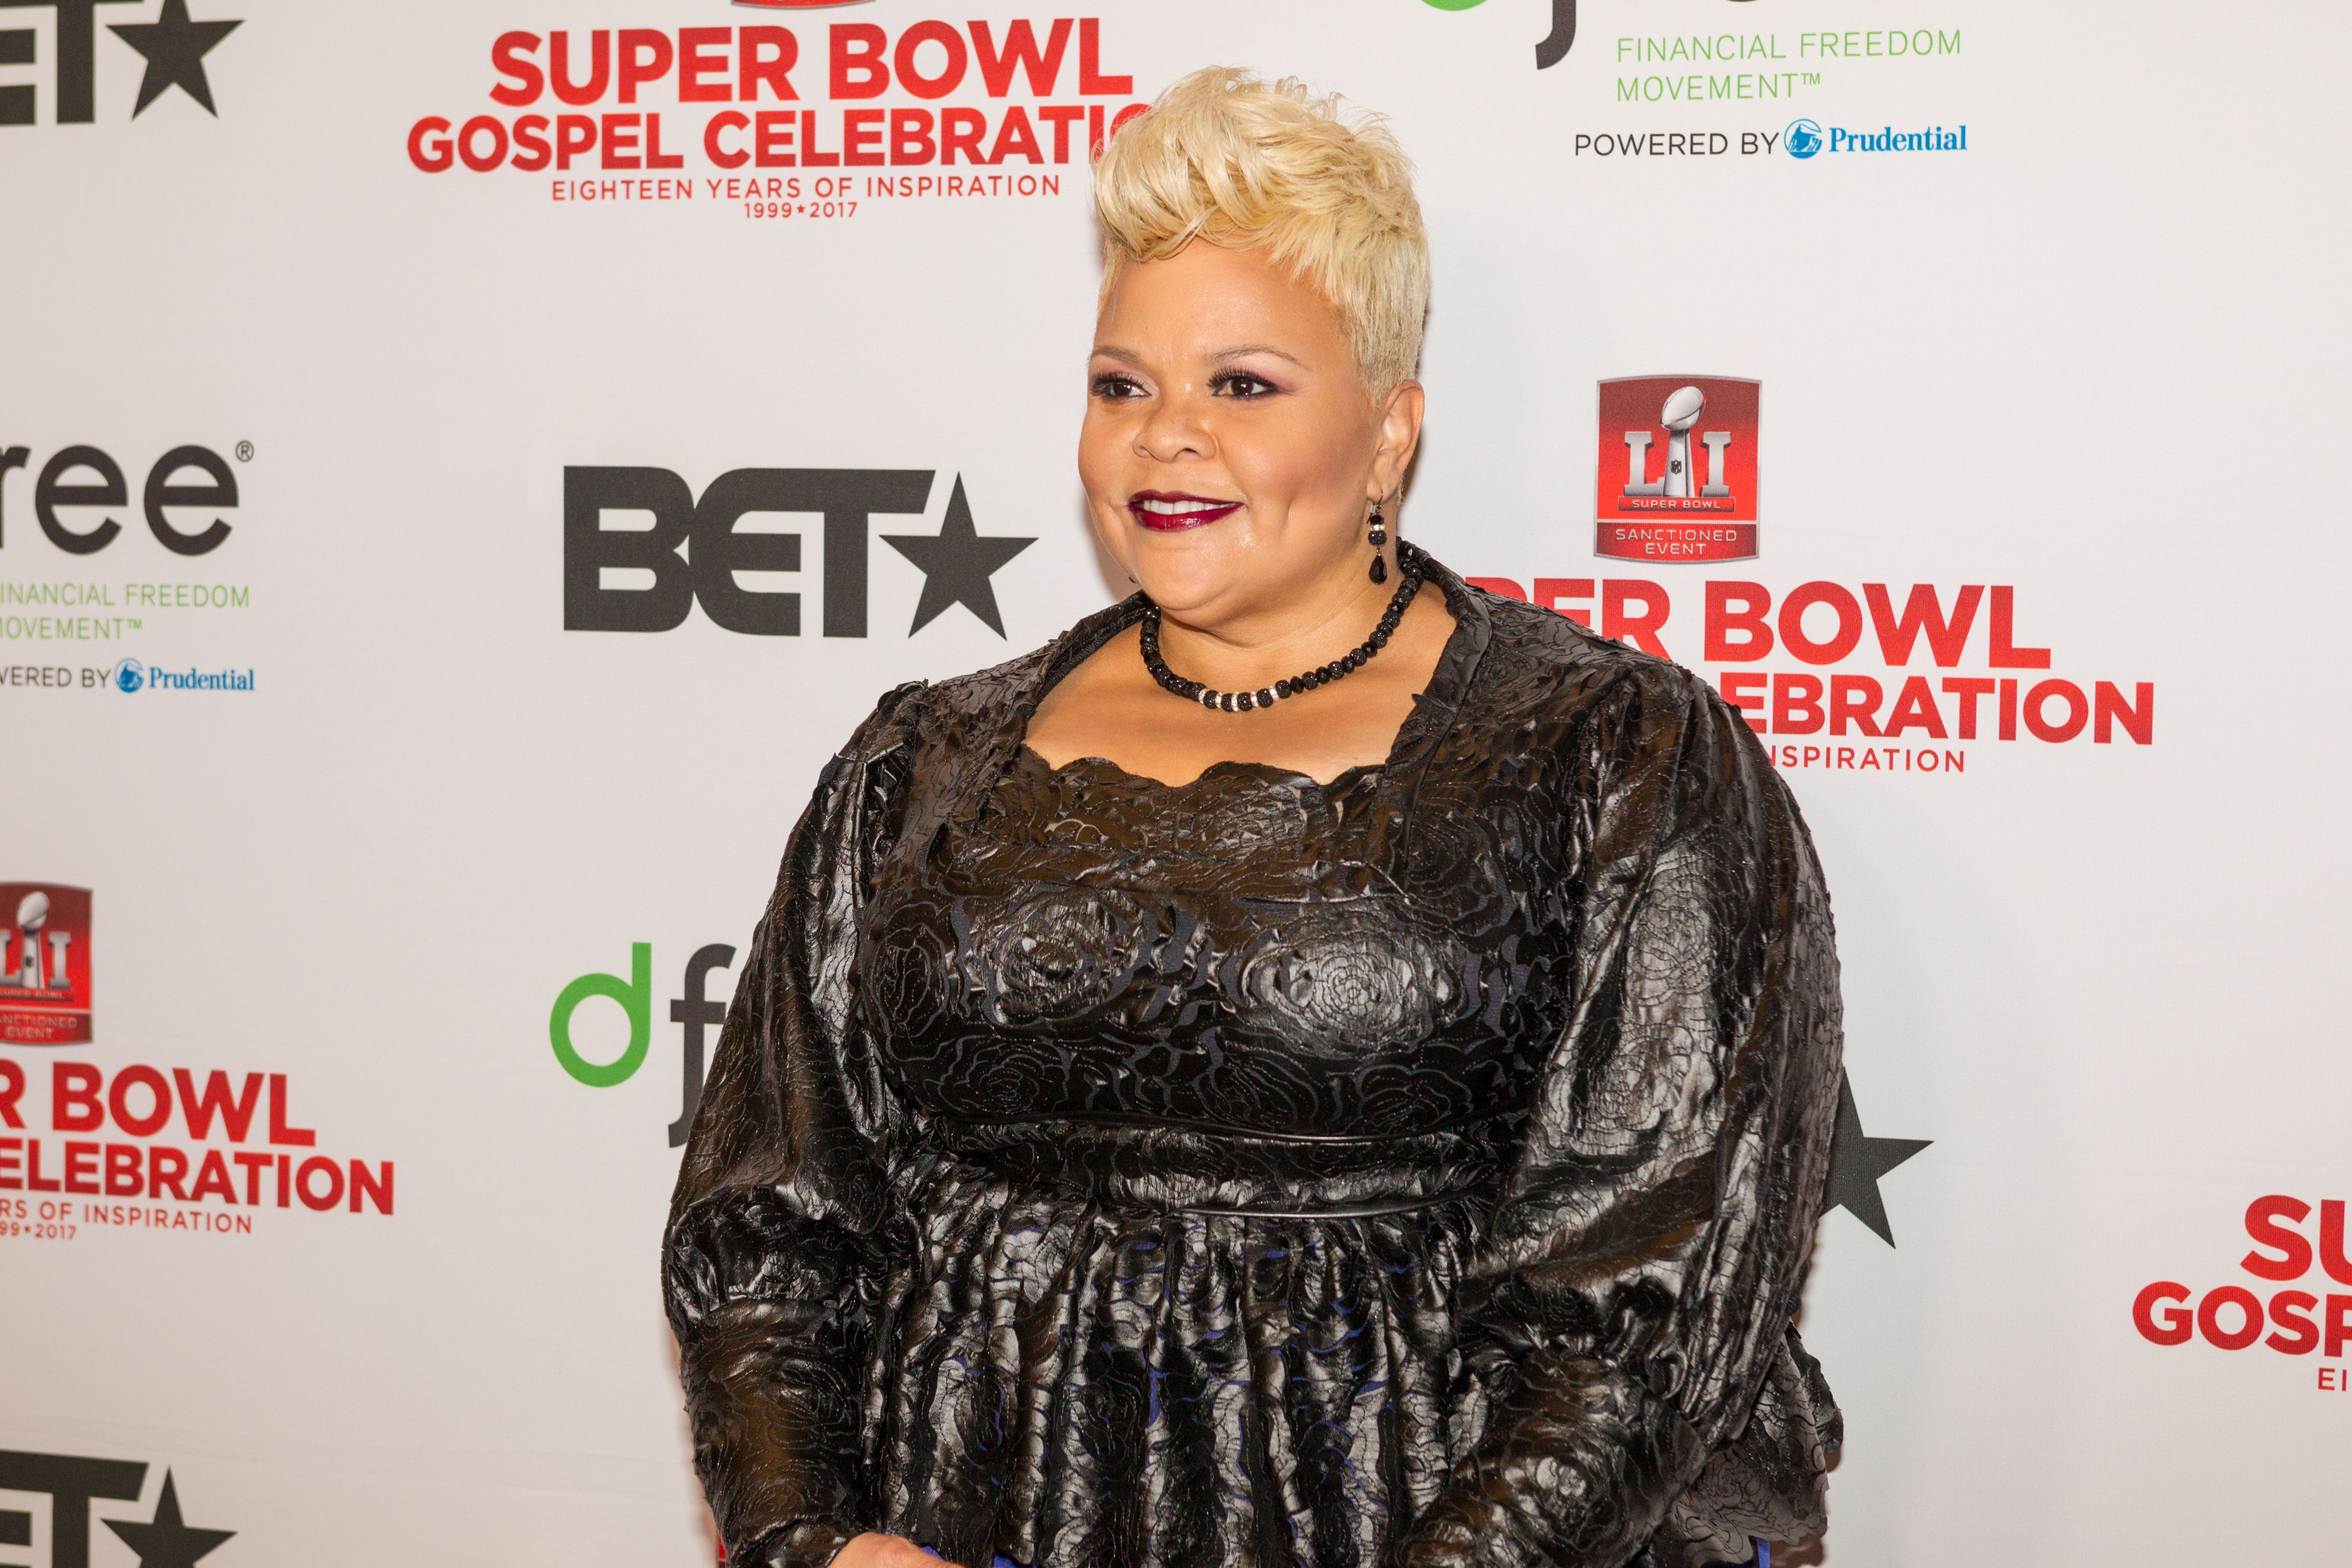 Tamela Mann attends BET's Super Bowl Gospel Celebration at Lakewood Church on February 3, 2017. | Photo: Getty Images